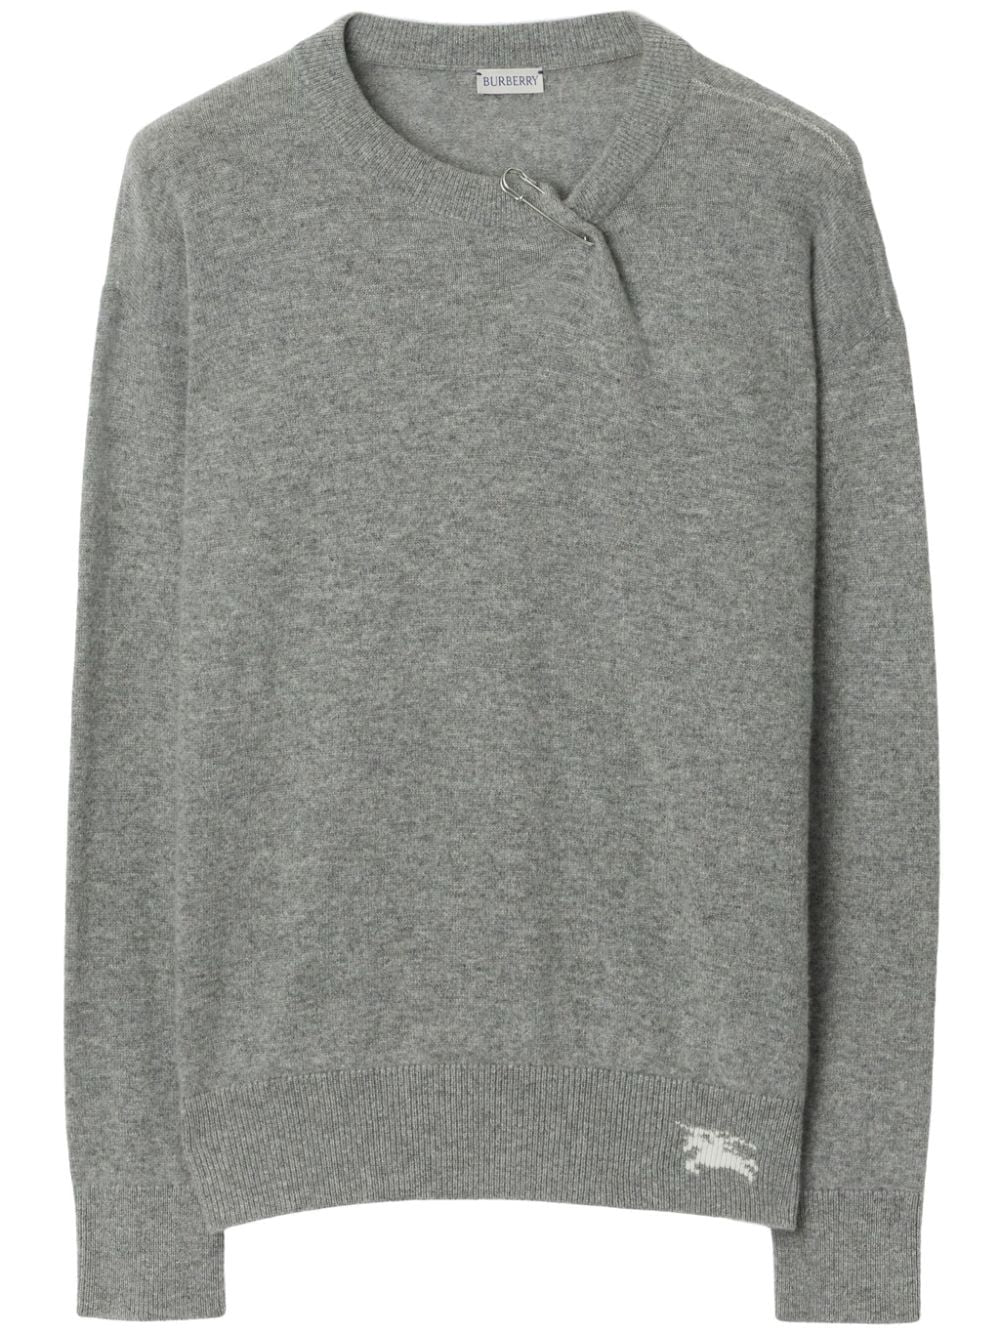 Gray sweater with logo embroidered on the front